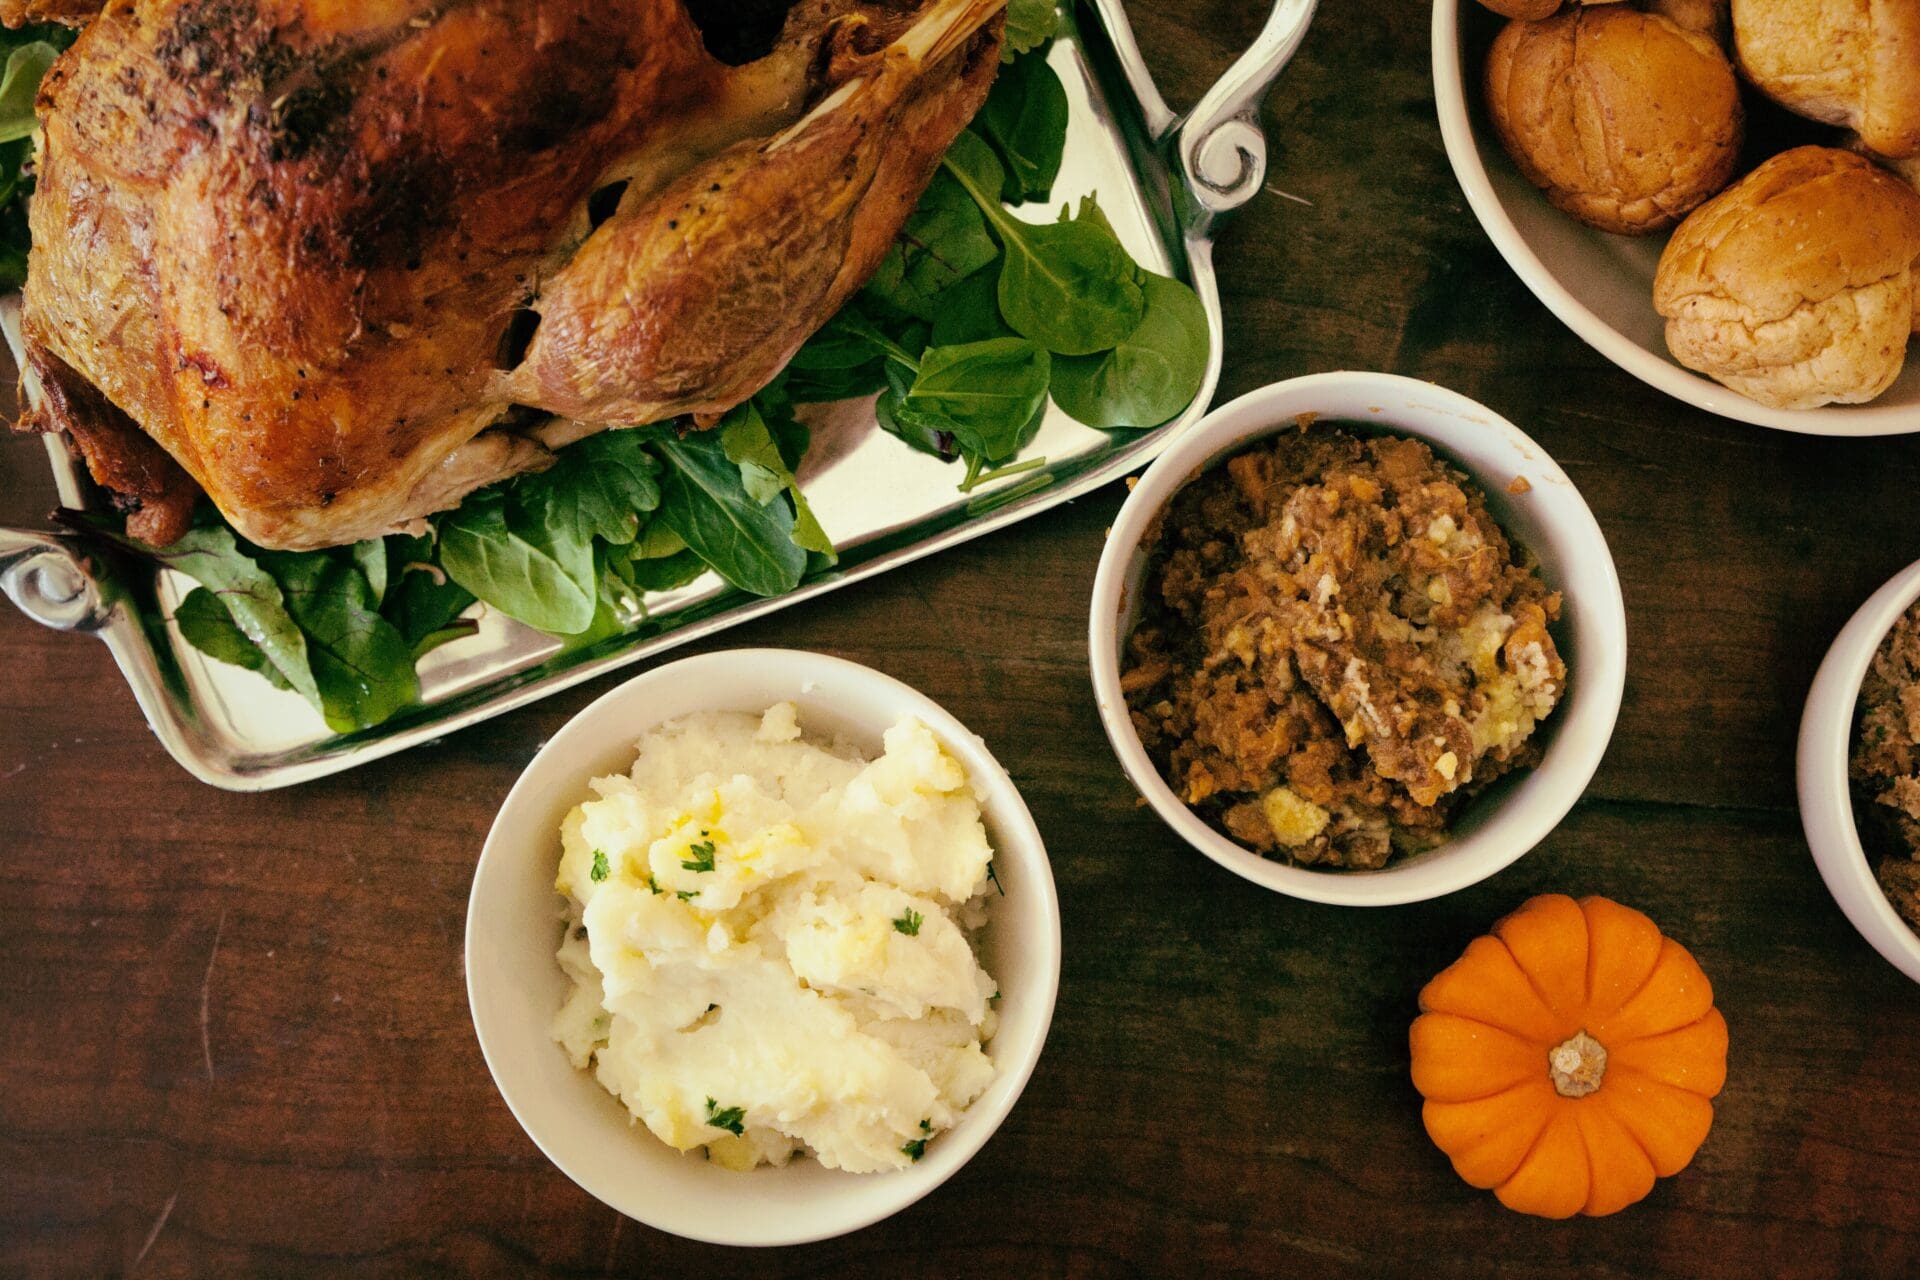 Group meals help to double Thanksgiving.